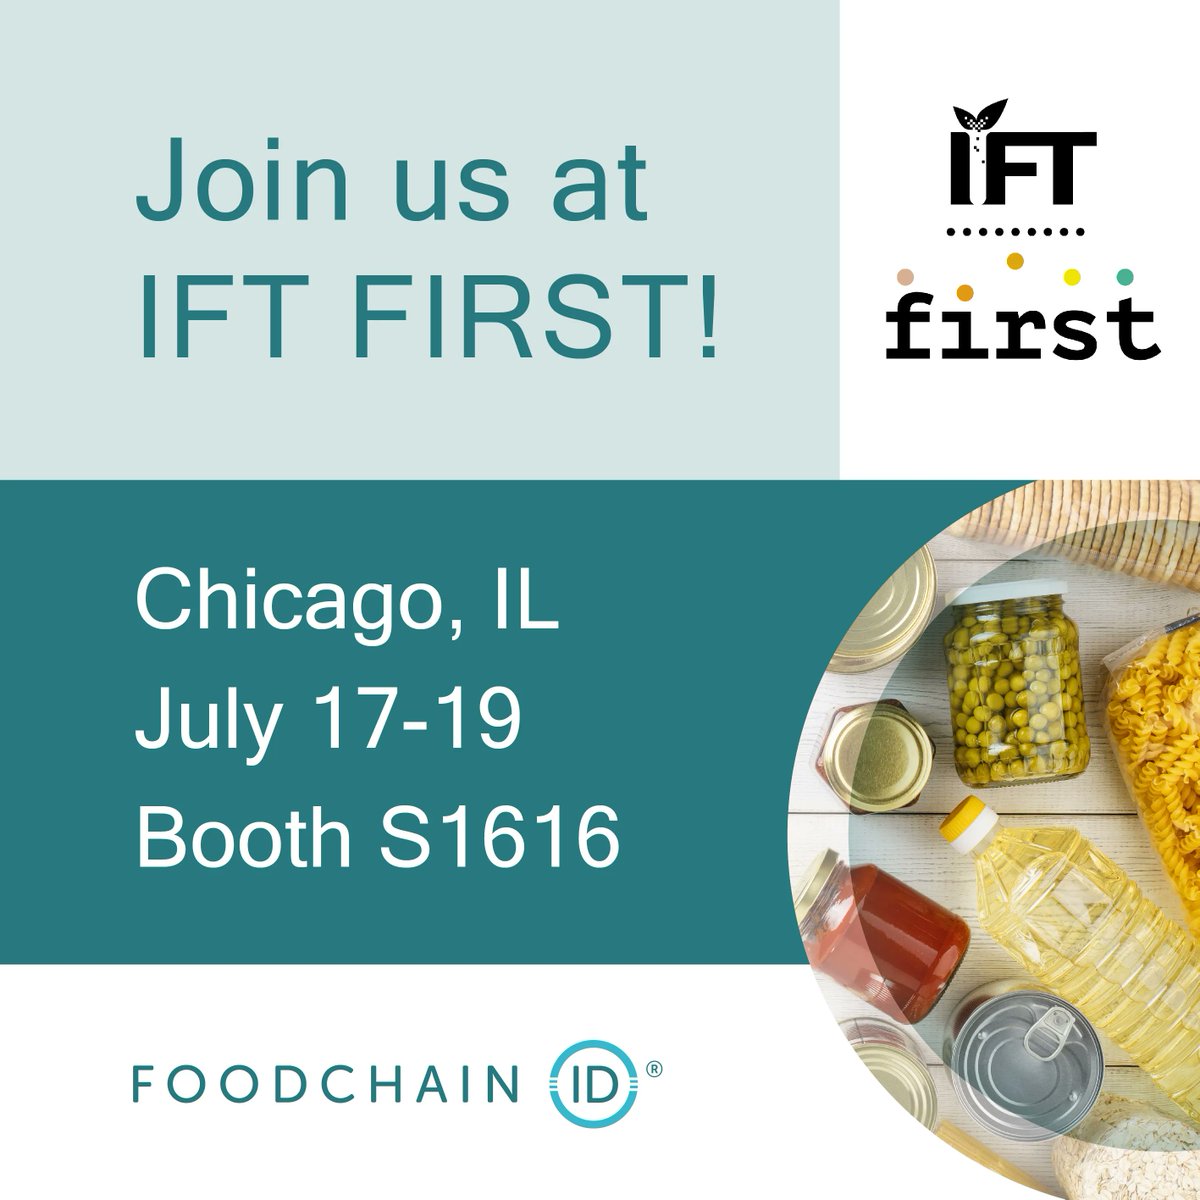 Are you looking for ways to streamline the #ProductDevelopment process? Stop by booth S1616 at #IFTFIRST to learn how #FoodChainID's Recipes and Specifications platform empowers efficient and compliant innovation. Book a meeting with our team here: 
buff.ly/3WM6gO2